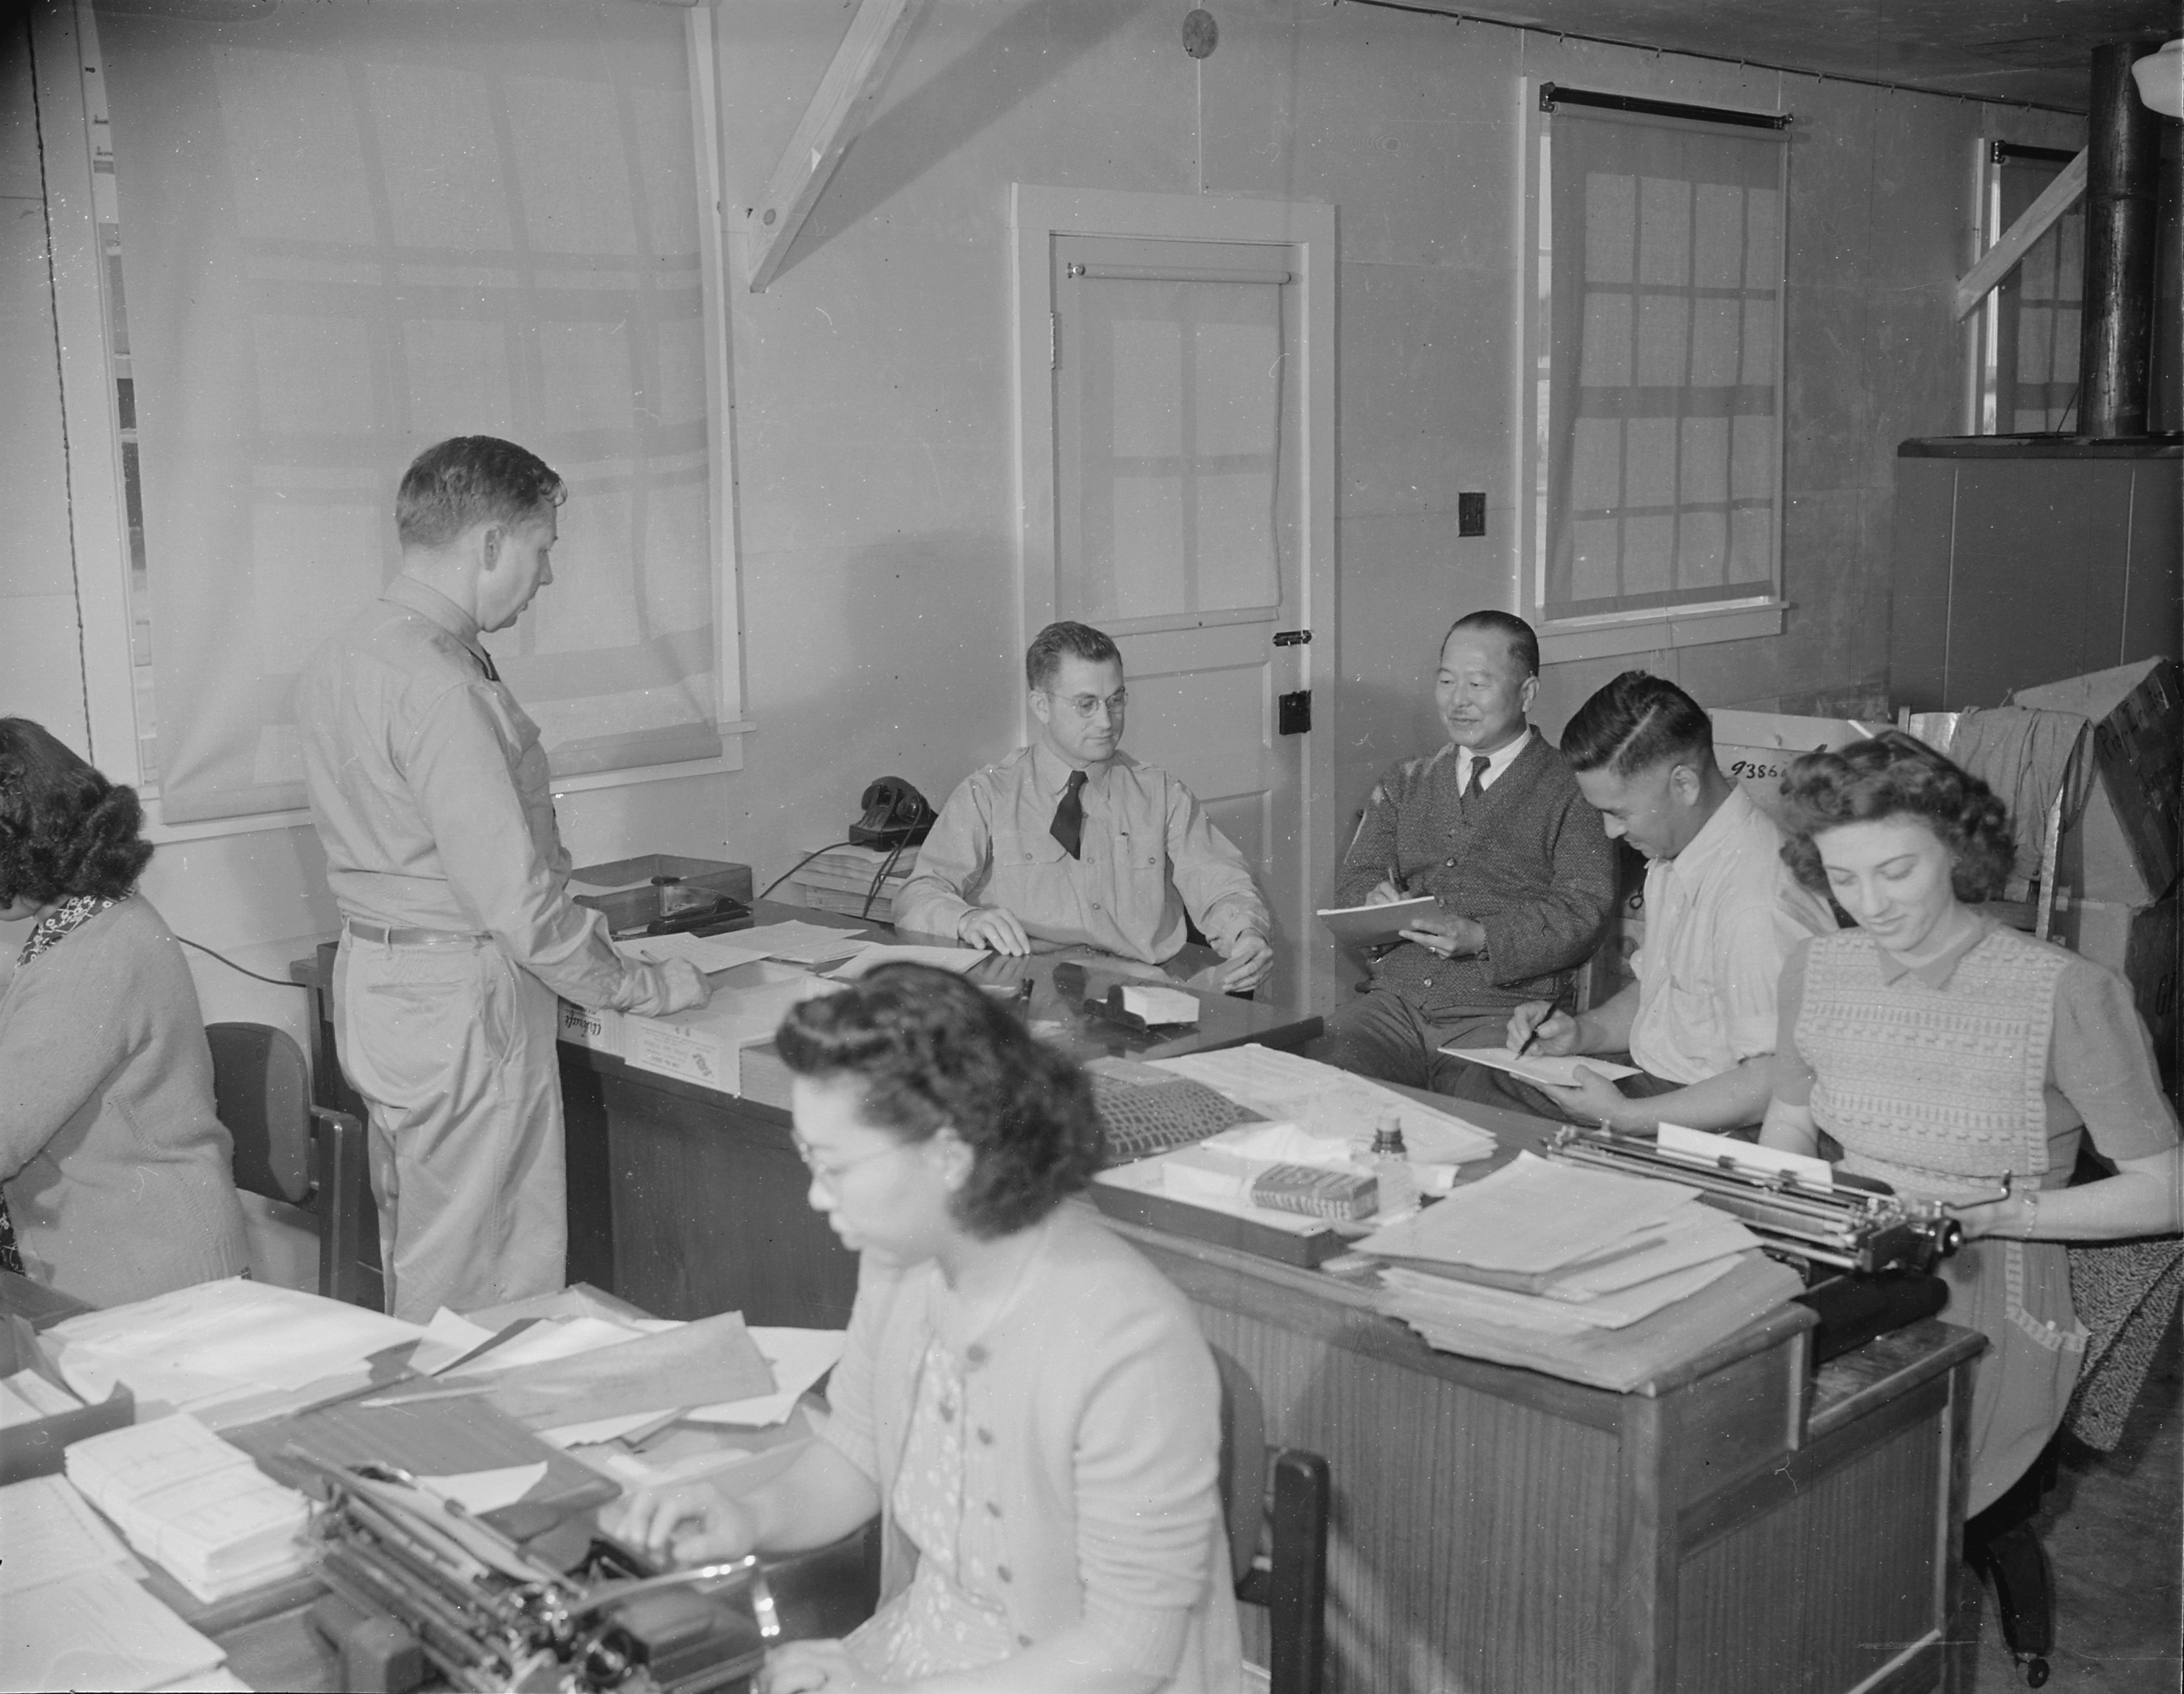 D. J. Hudson, Steward, R. R. Richmond, and other workers of the Mess Section of Jerome War Relocation Center, Arkansas, United States, 19 Nov 1942